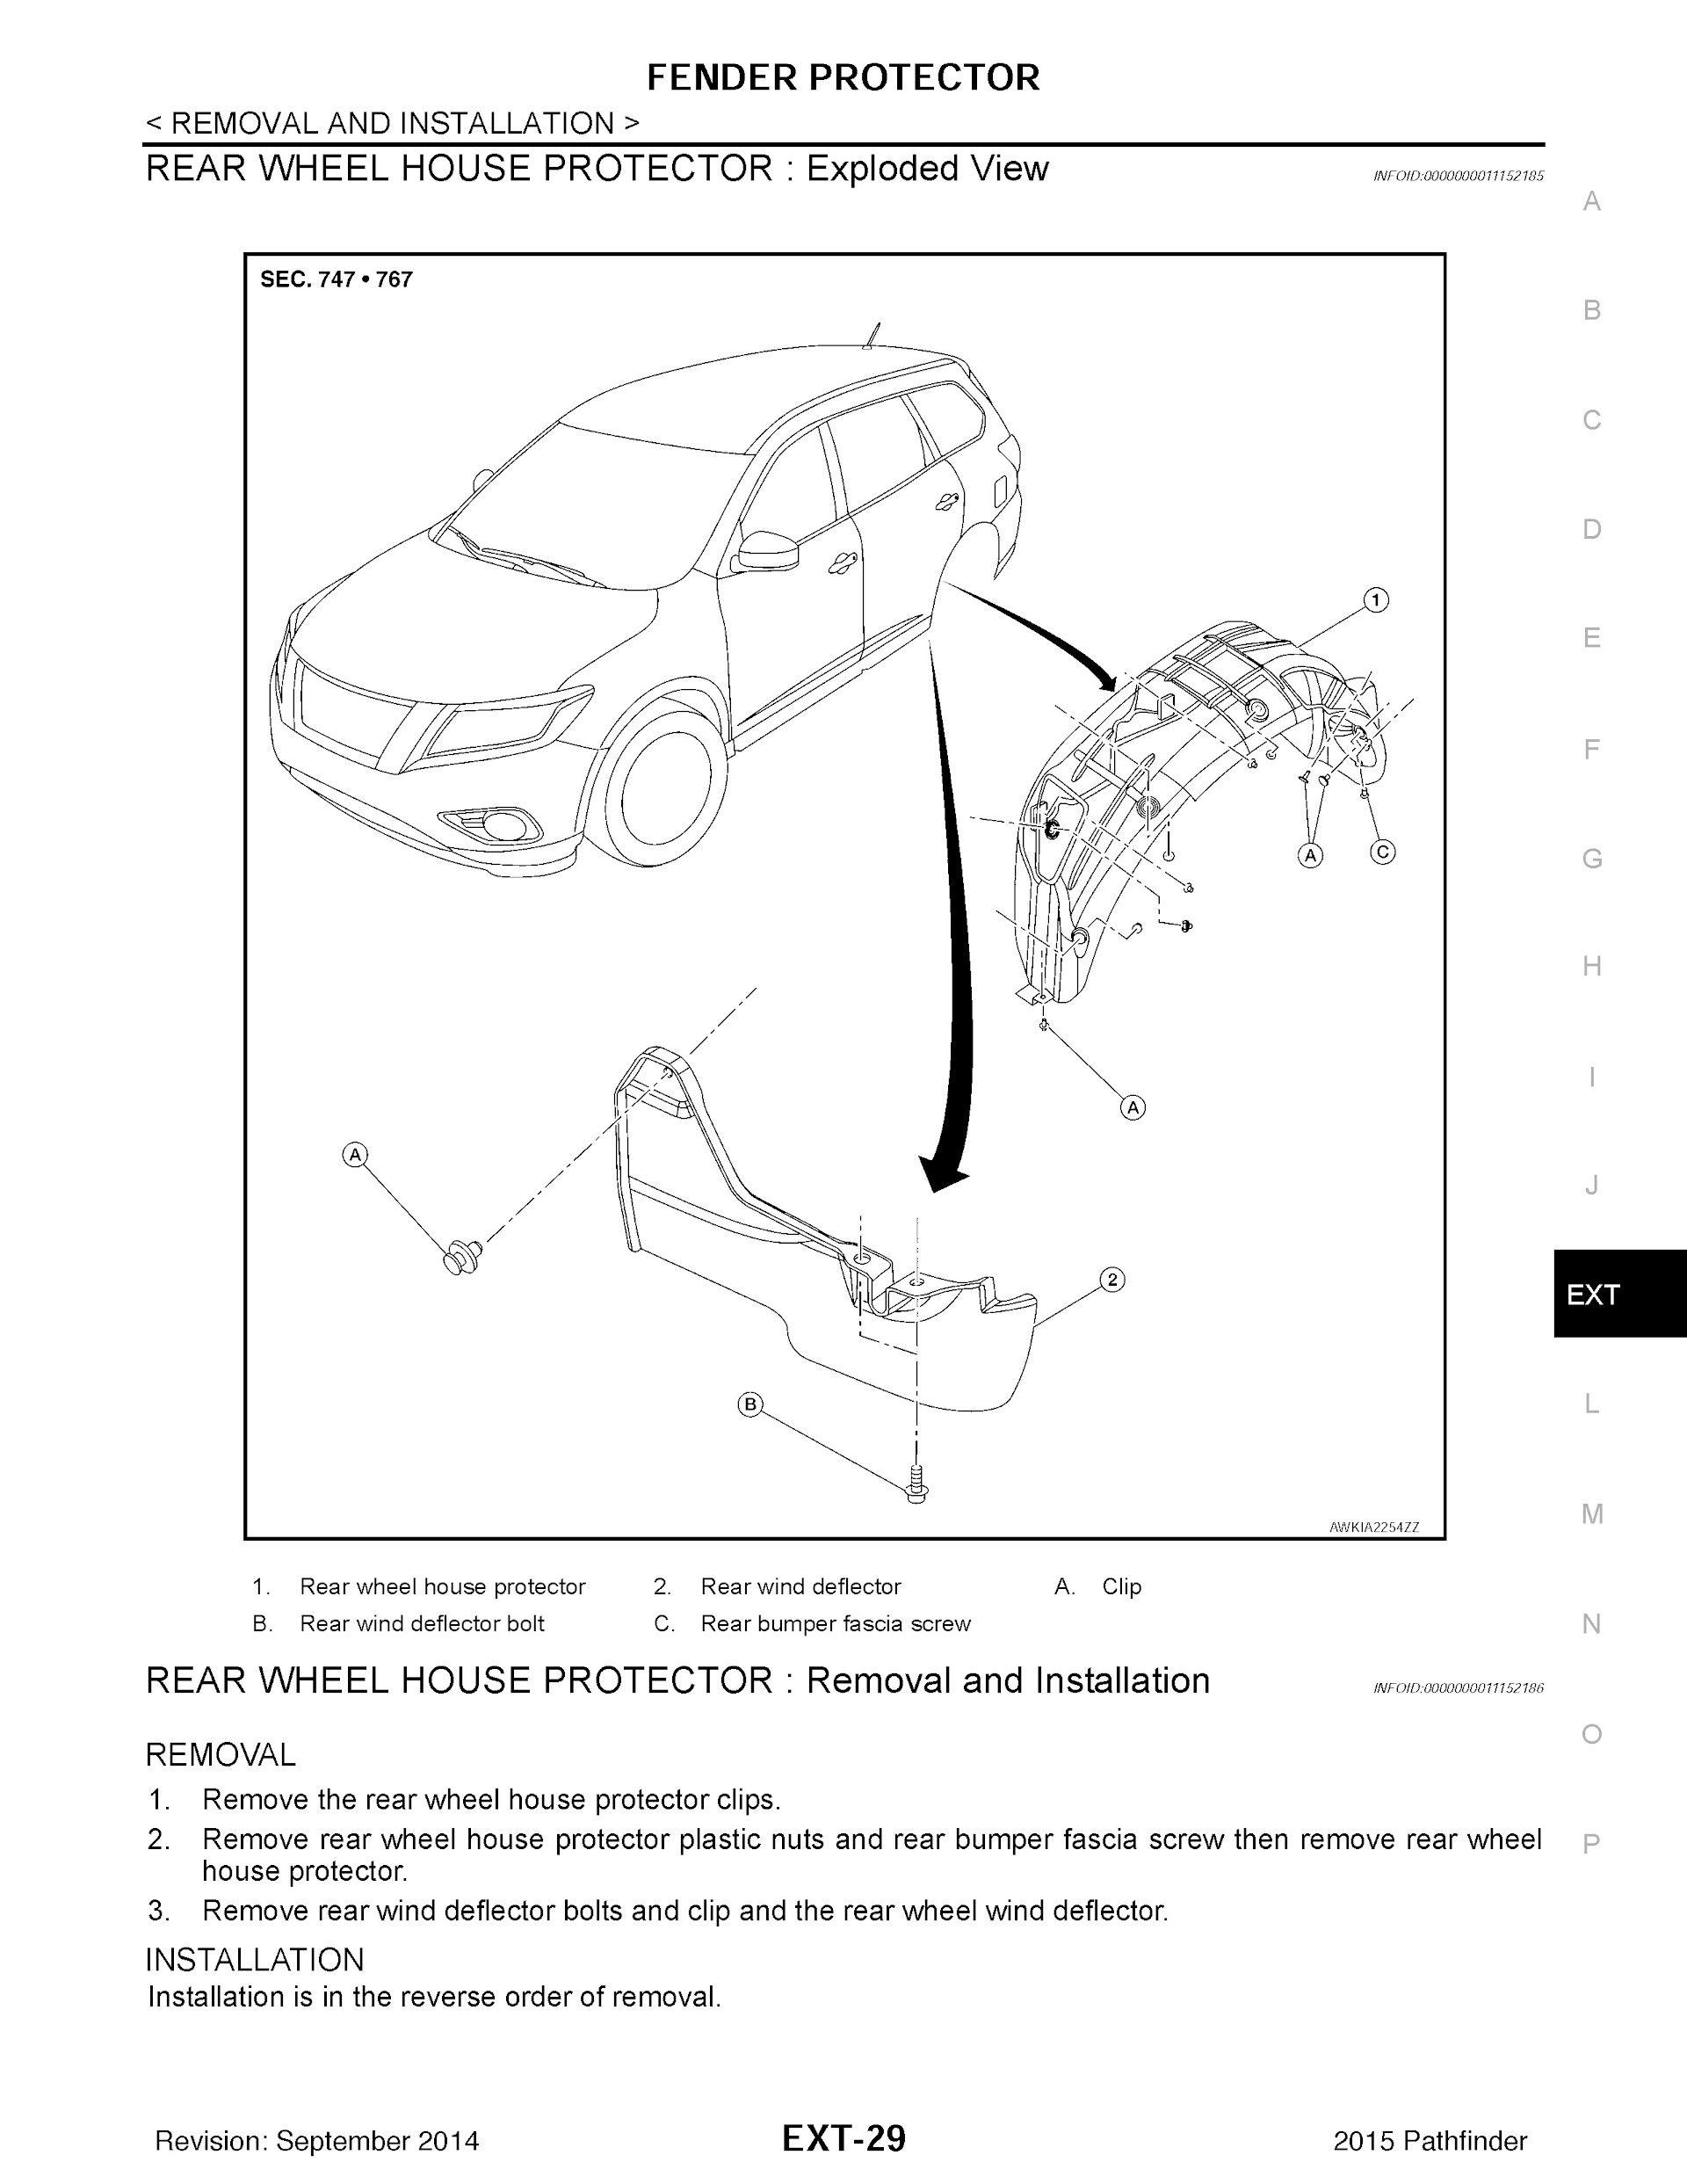 2015 Nissan Pathfinder Repair Manual, Fender Protector Removal and Installation